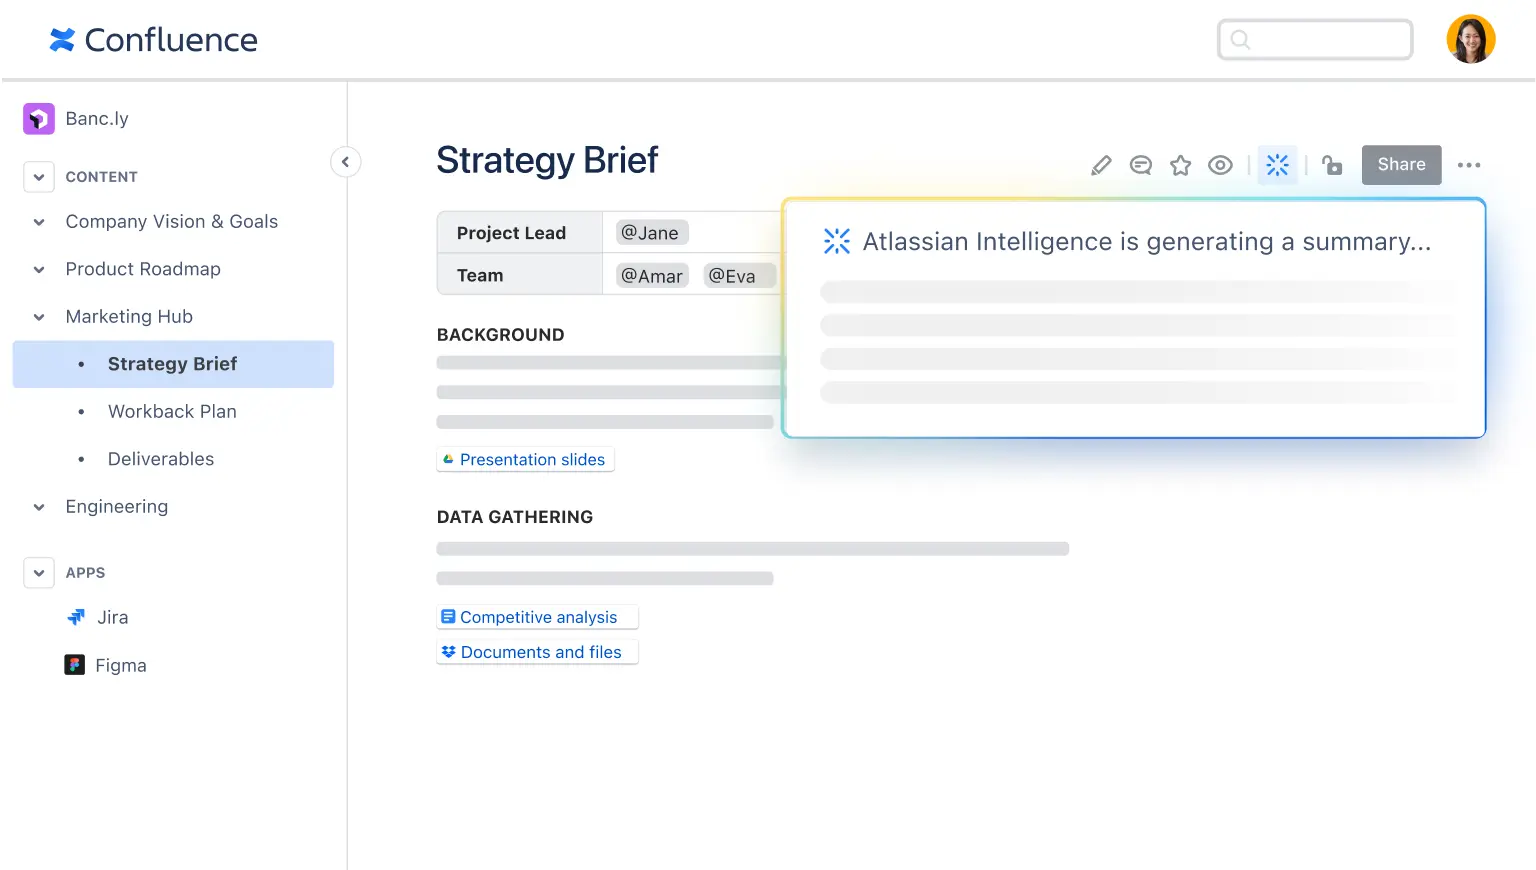 image of Atlassian Intelligence on a confluence page